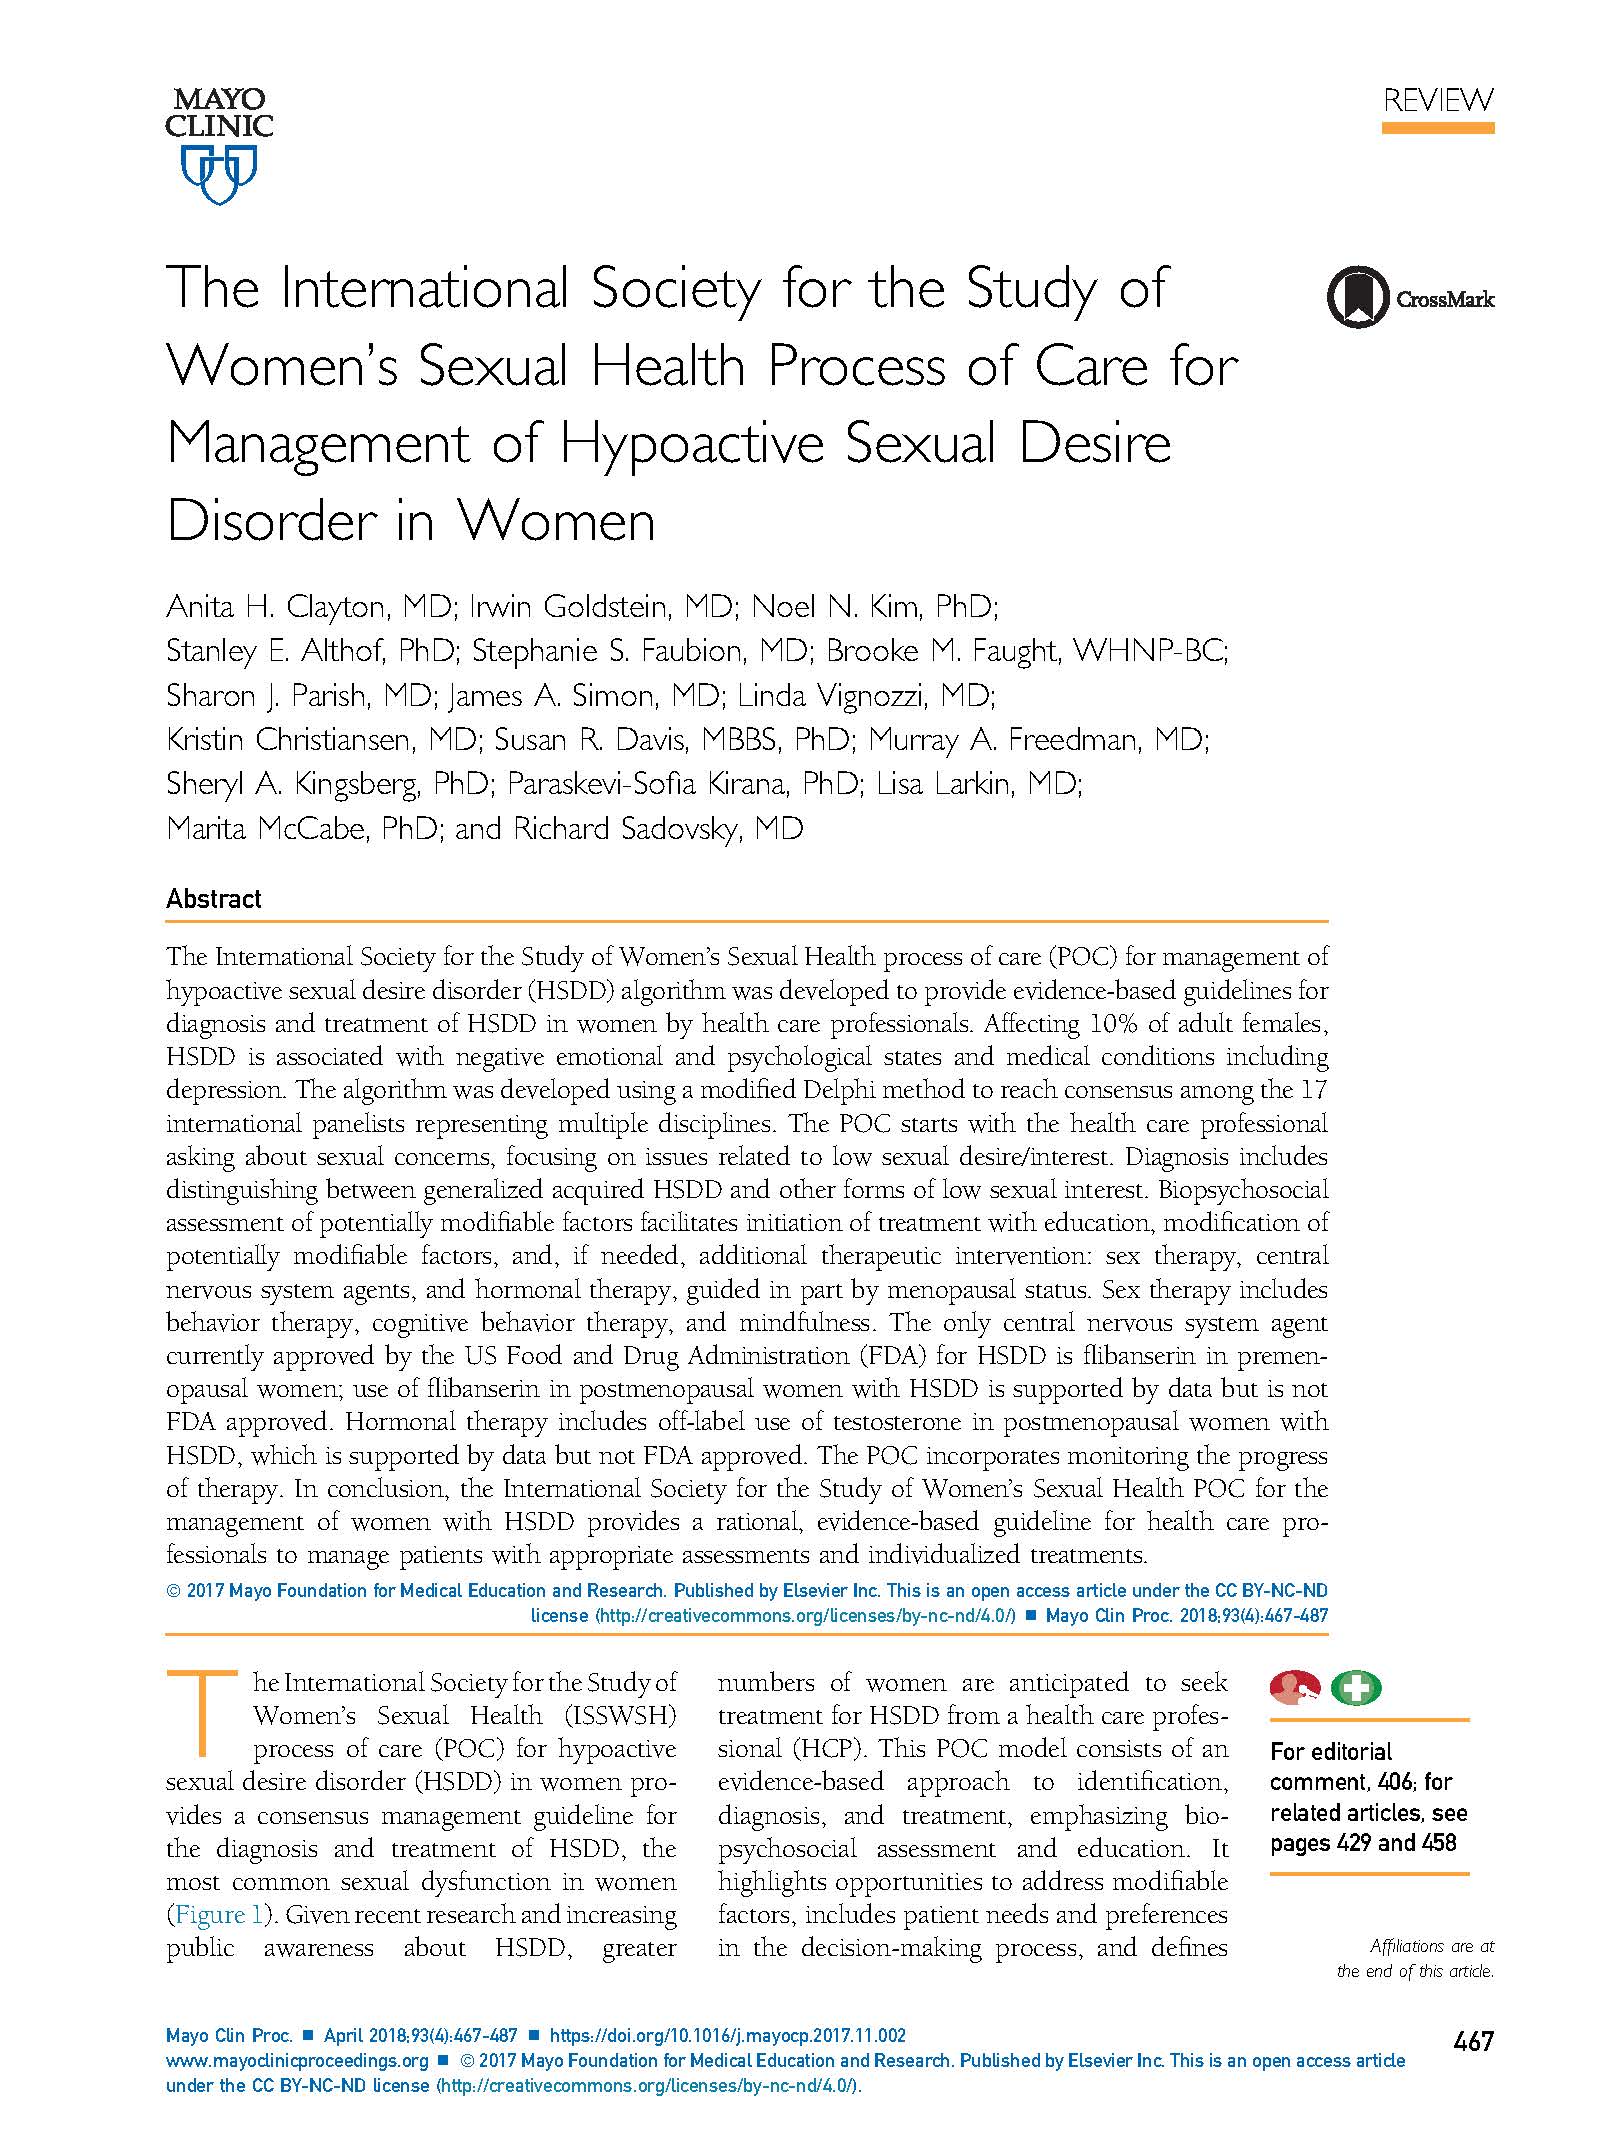 The International Society for the Study of Women’s Sexual Health Process of Care for Management of Hypoactive Sexual Desire Disorder in Women